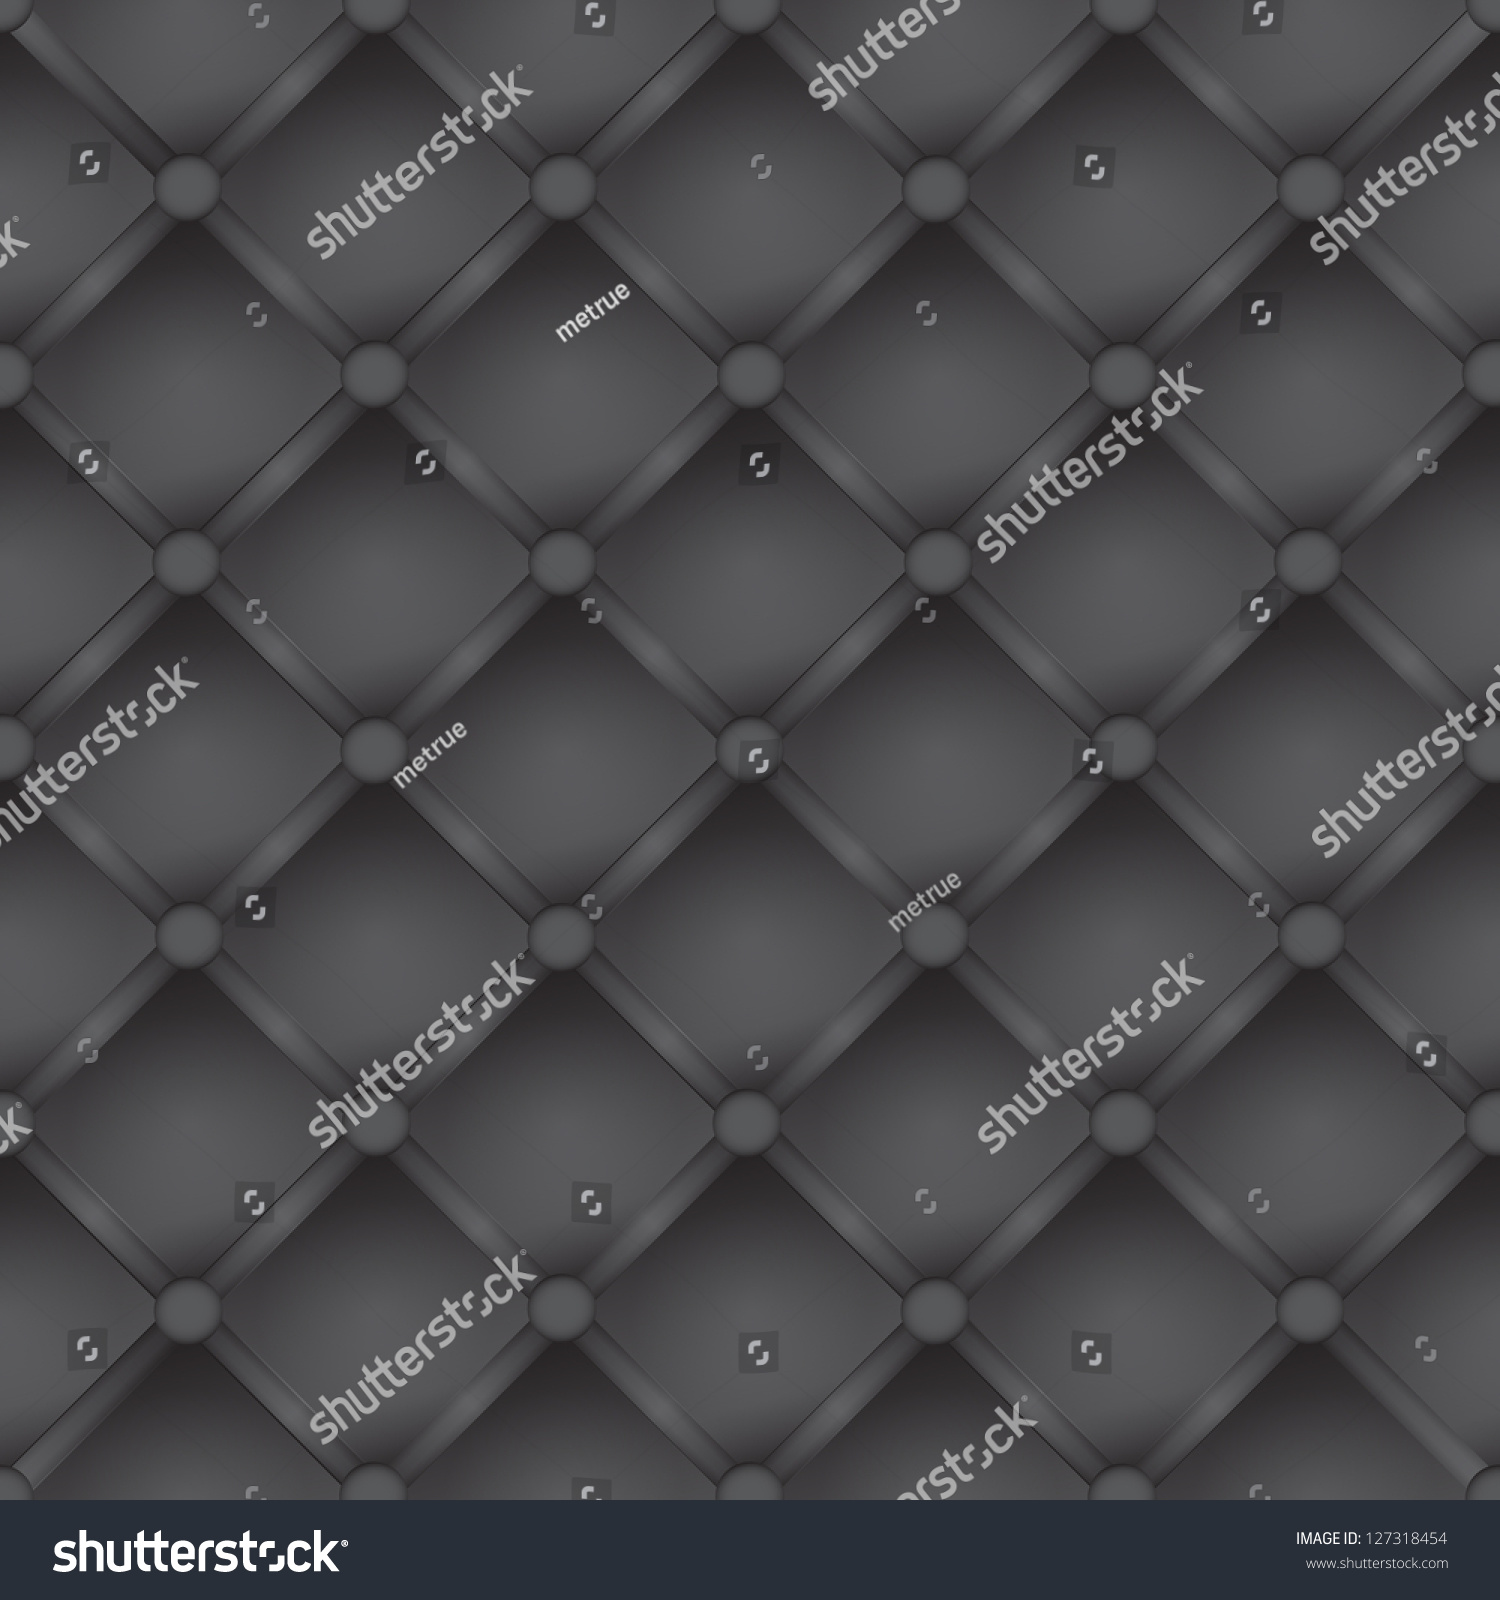 Royalty Stock Illustration Of New Textured Background Can Use